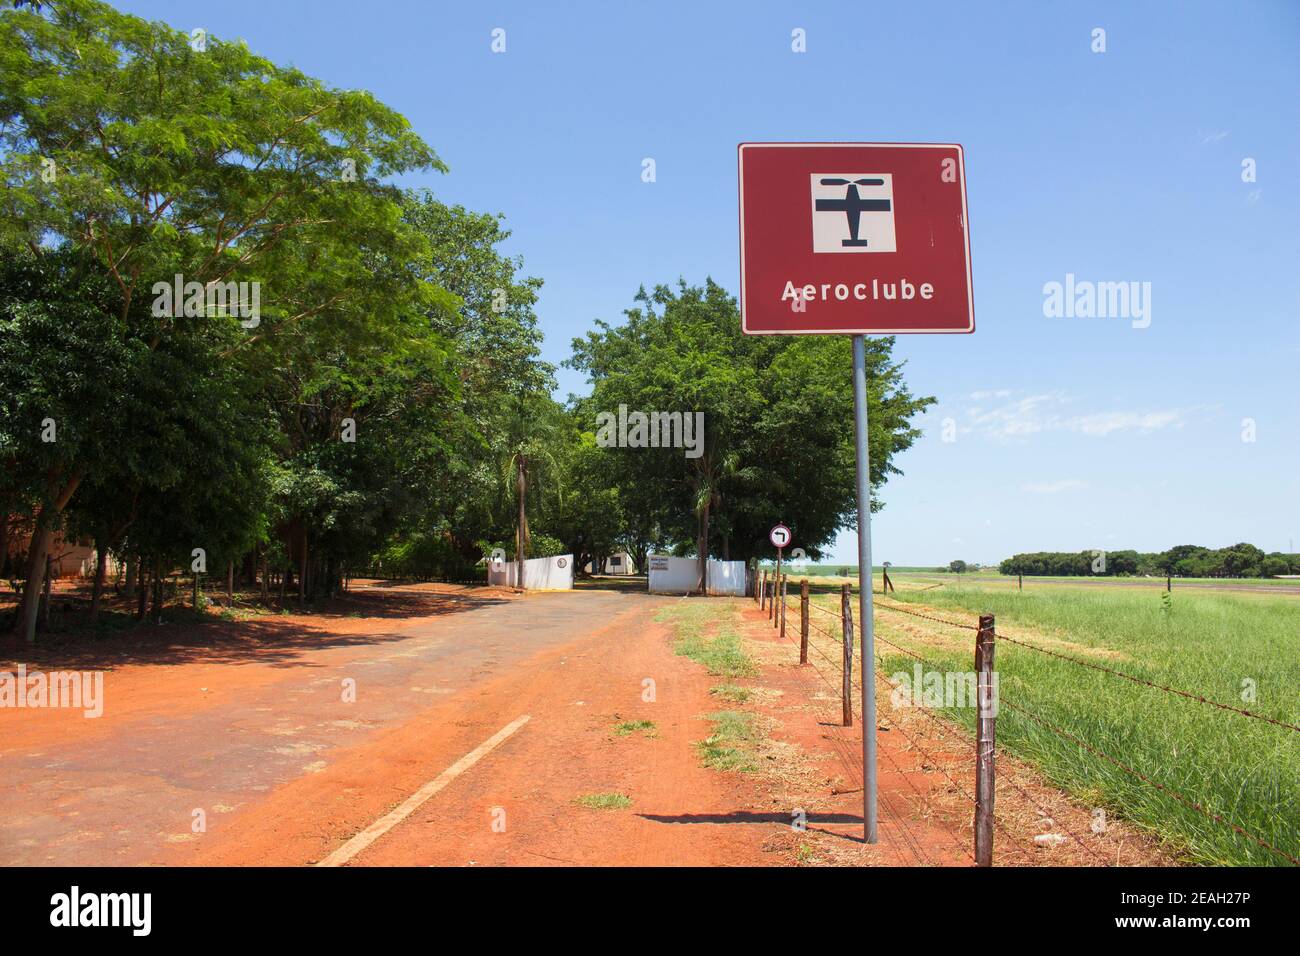 Ibitinga, SP, Brazil - 02 08 2021: Signpost of Ibitinga's flying club and the entrance view of the same club Stock Photo